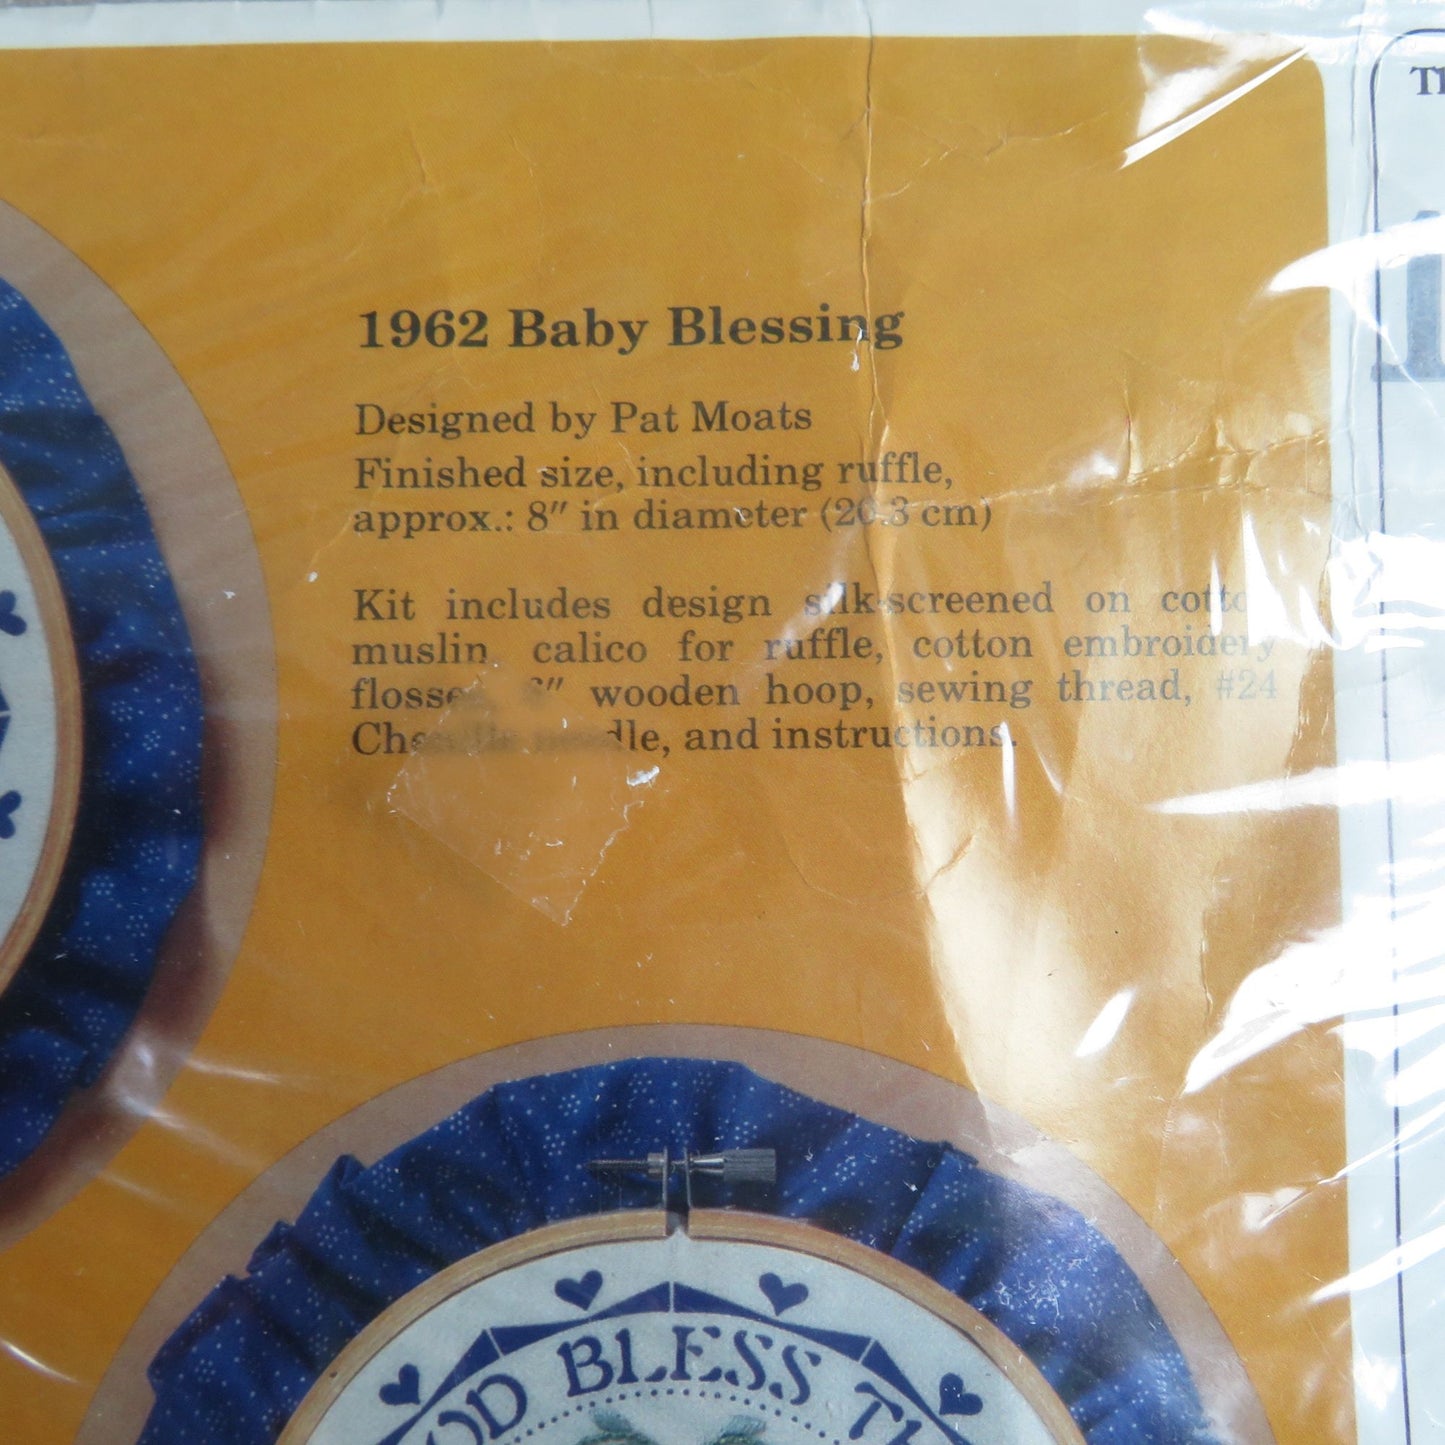 Baby Blessing Embroidery Kit Creative Circle Baby Shower Gift Needlecraft Nursery Decor